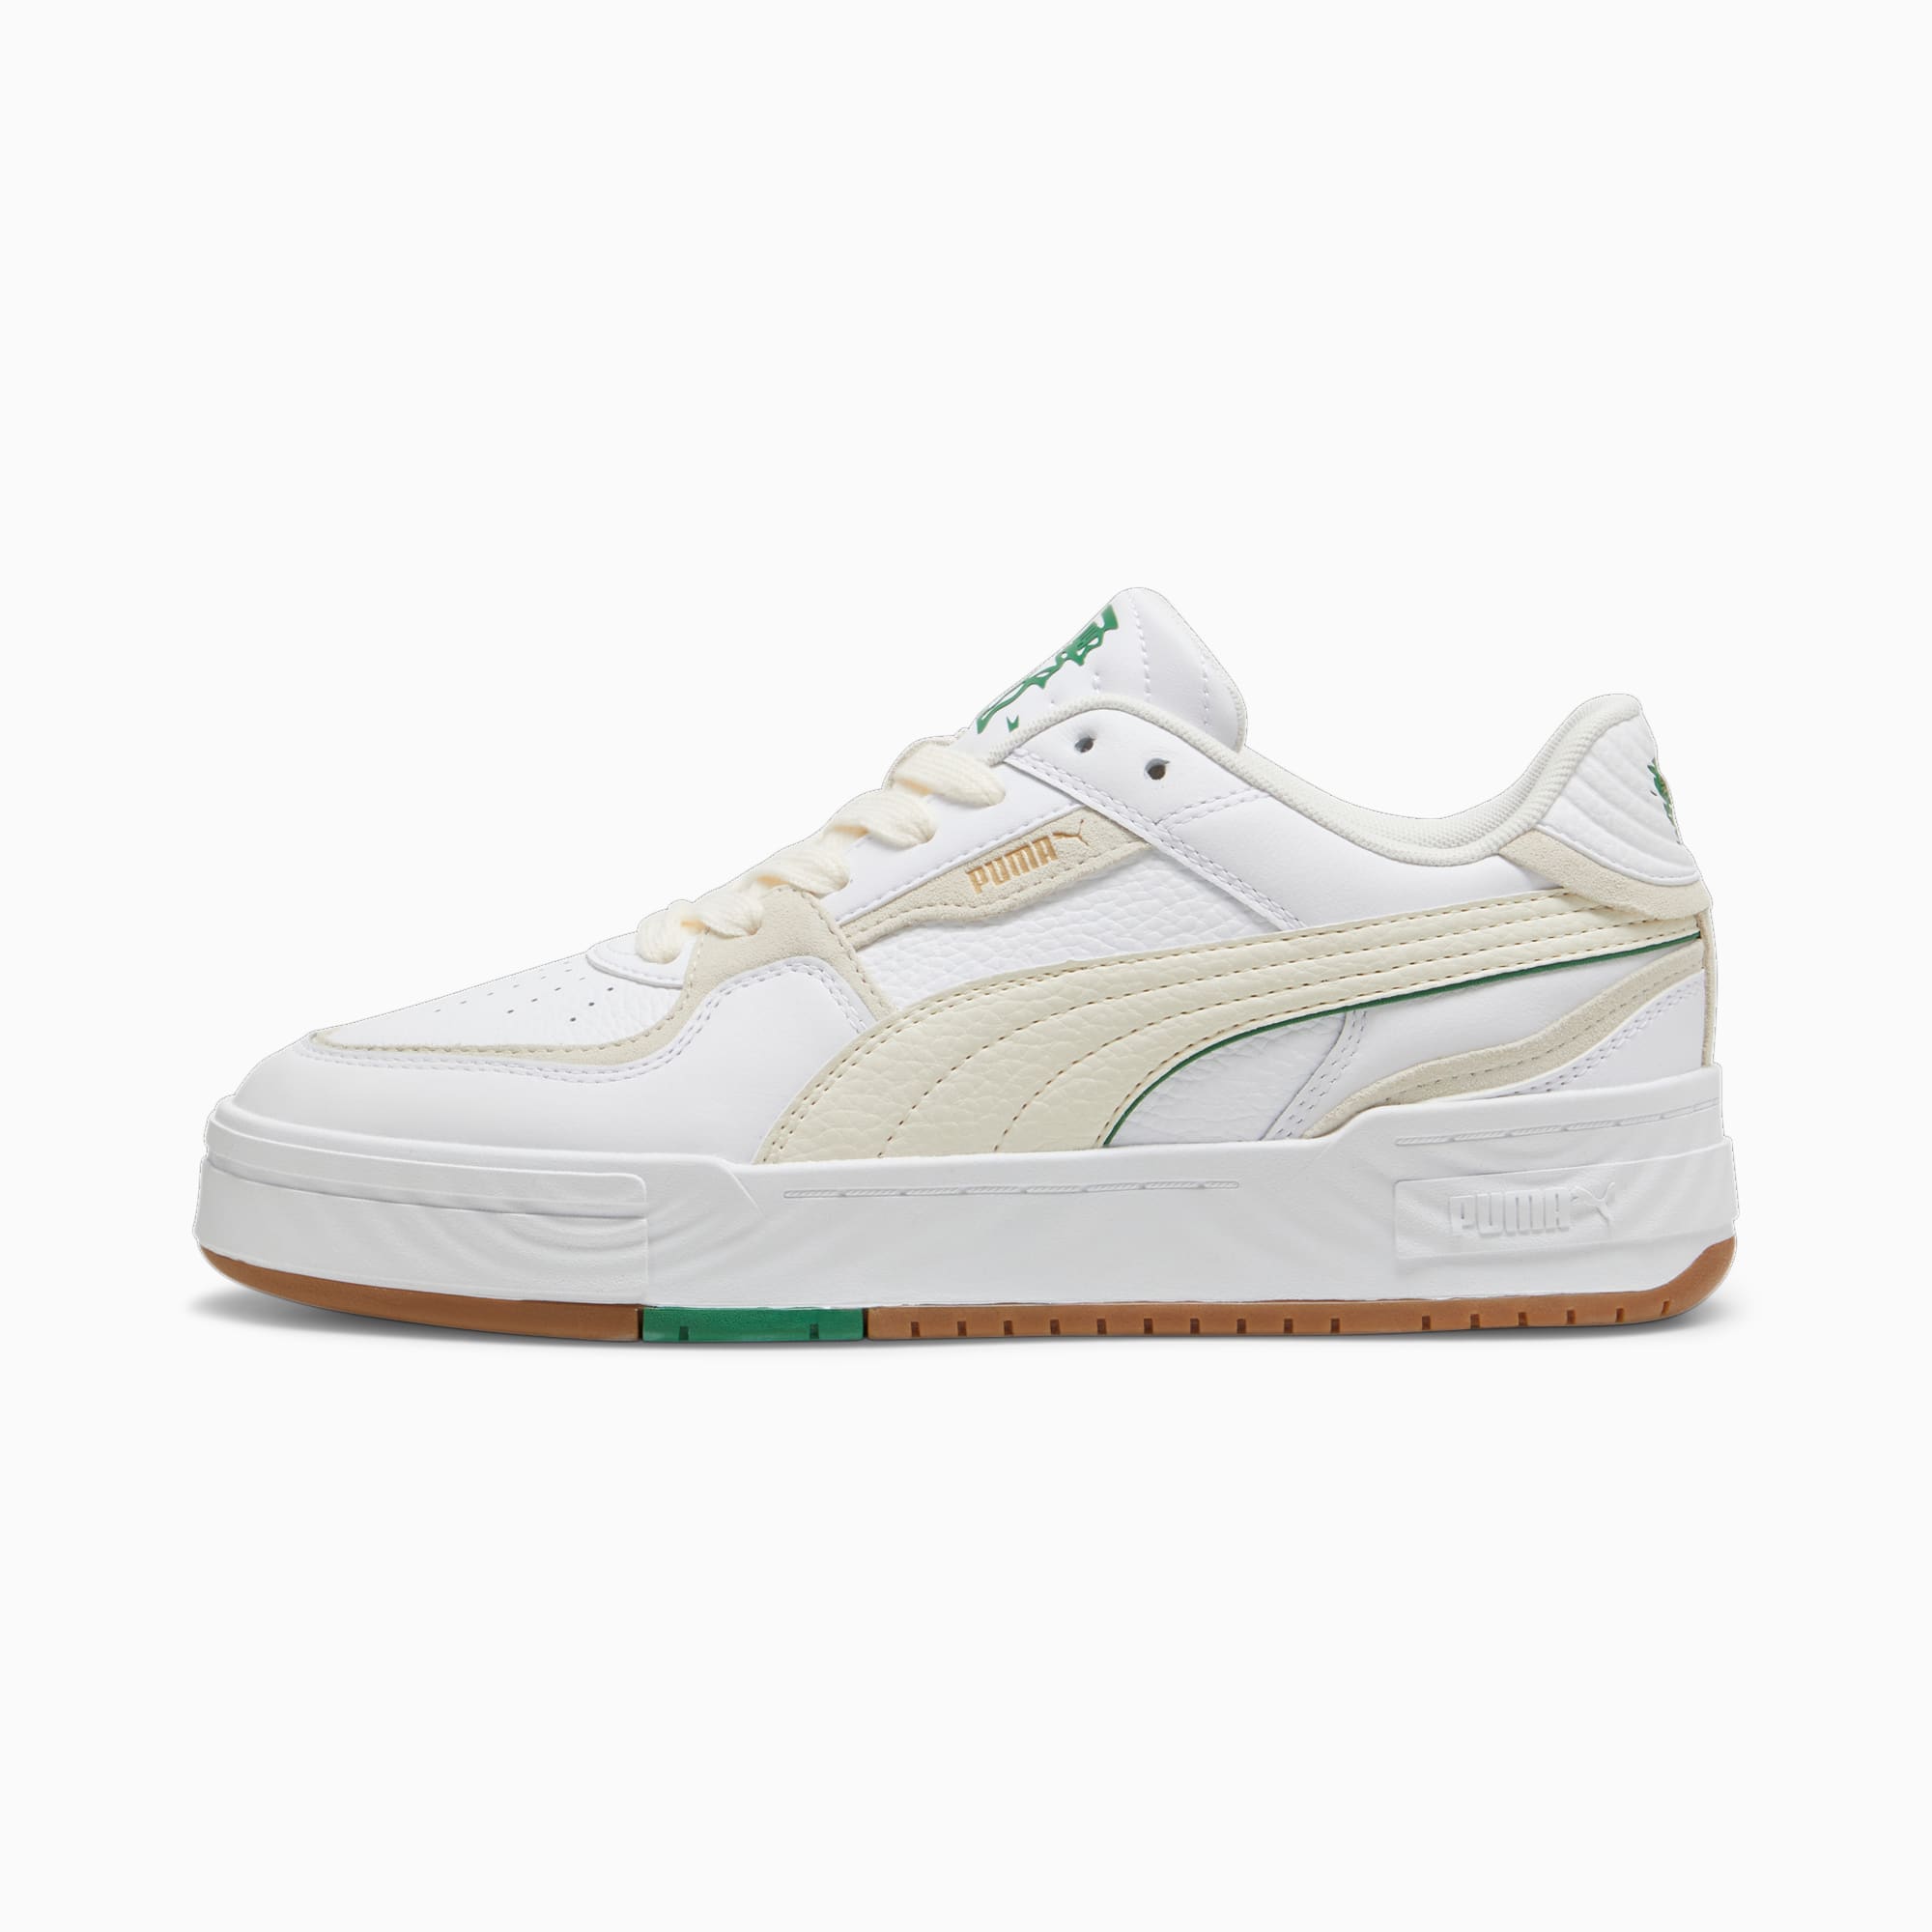 Women's PUMA Ca Pro Ripple Earth Sneakers, White/Frosted Ivory/Gum